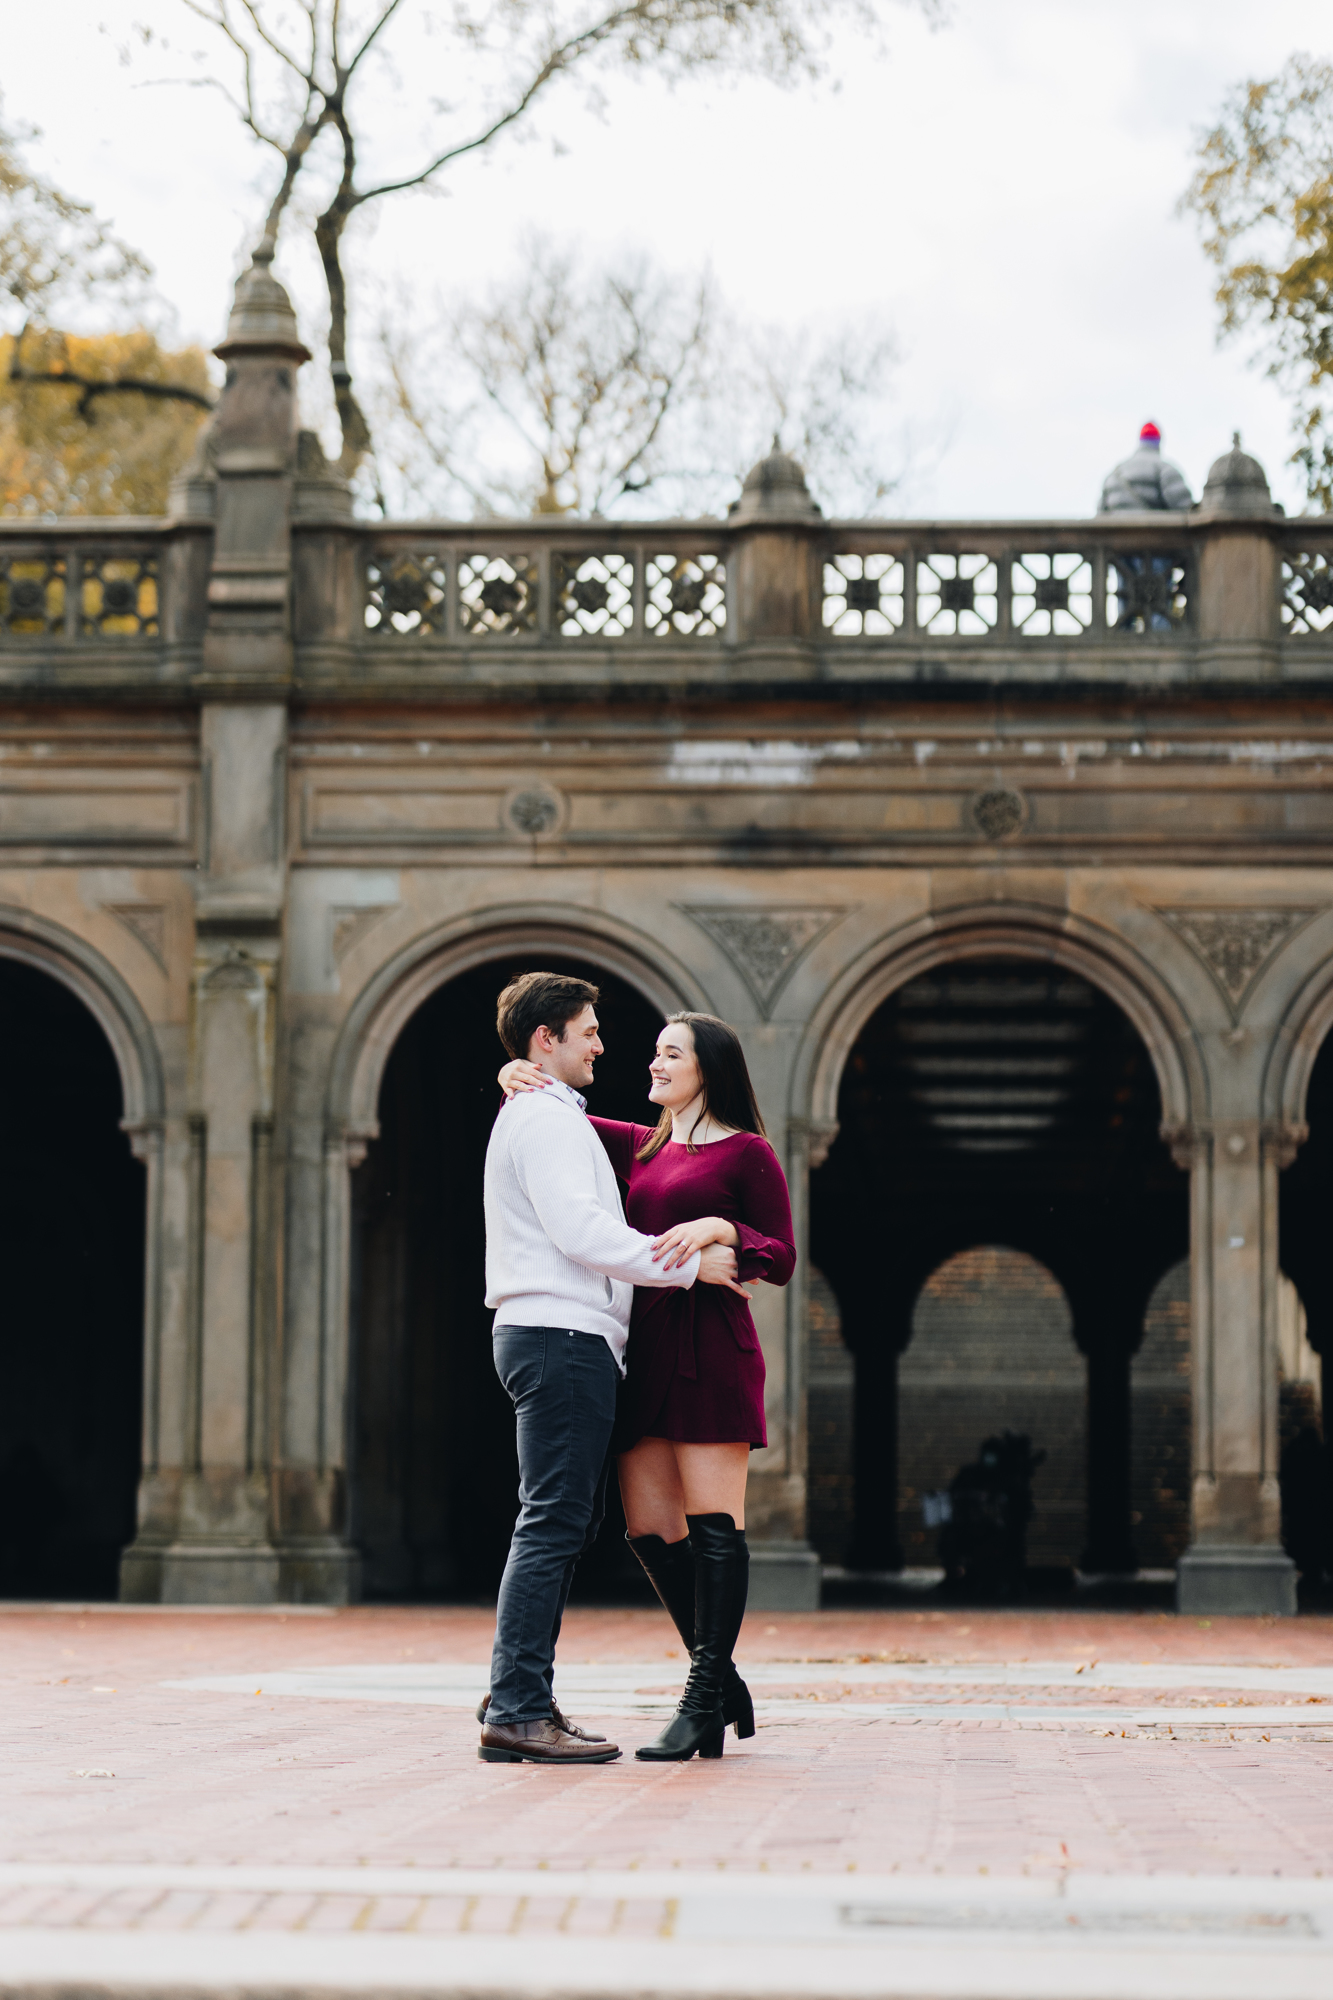 Breathtaking Fall Engagement Photos in Central Park New York